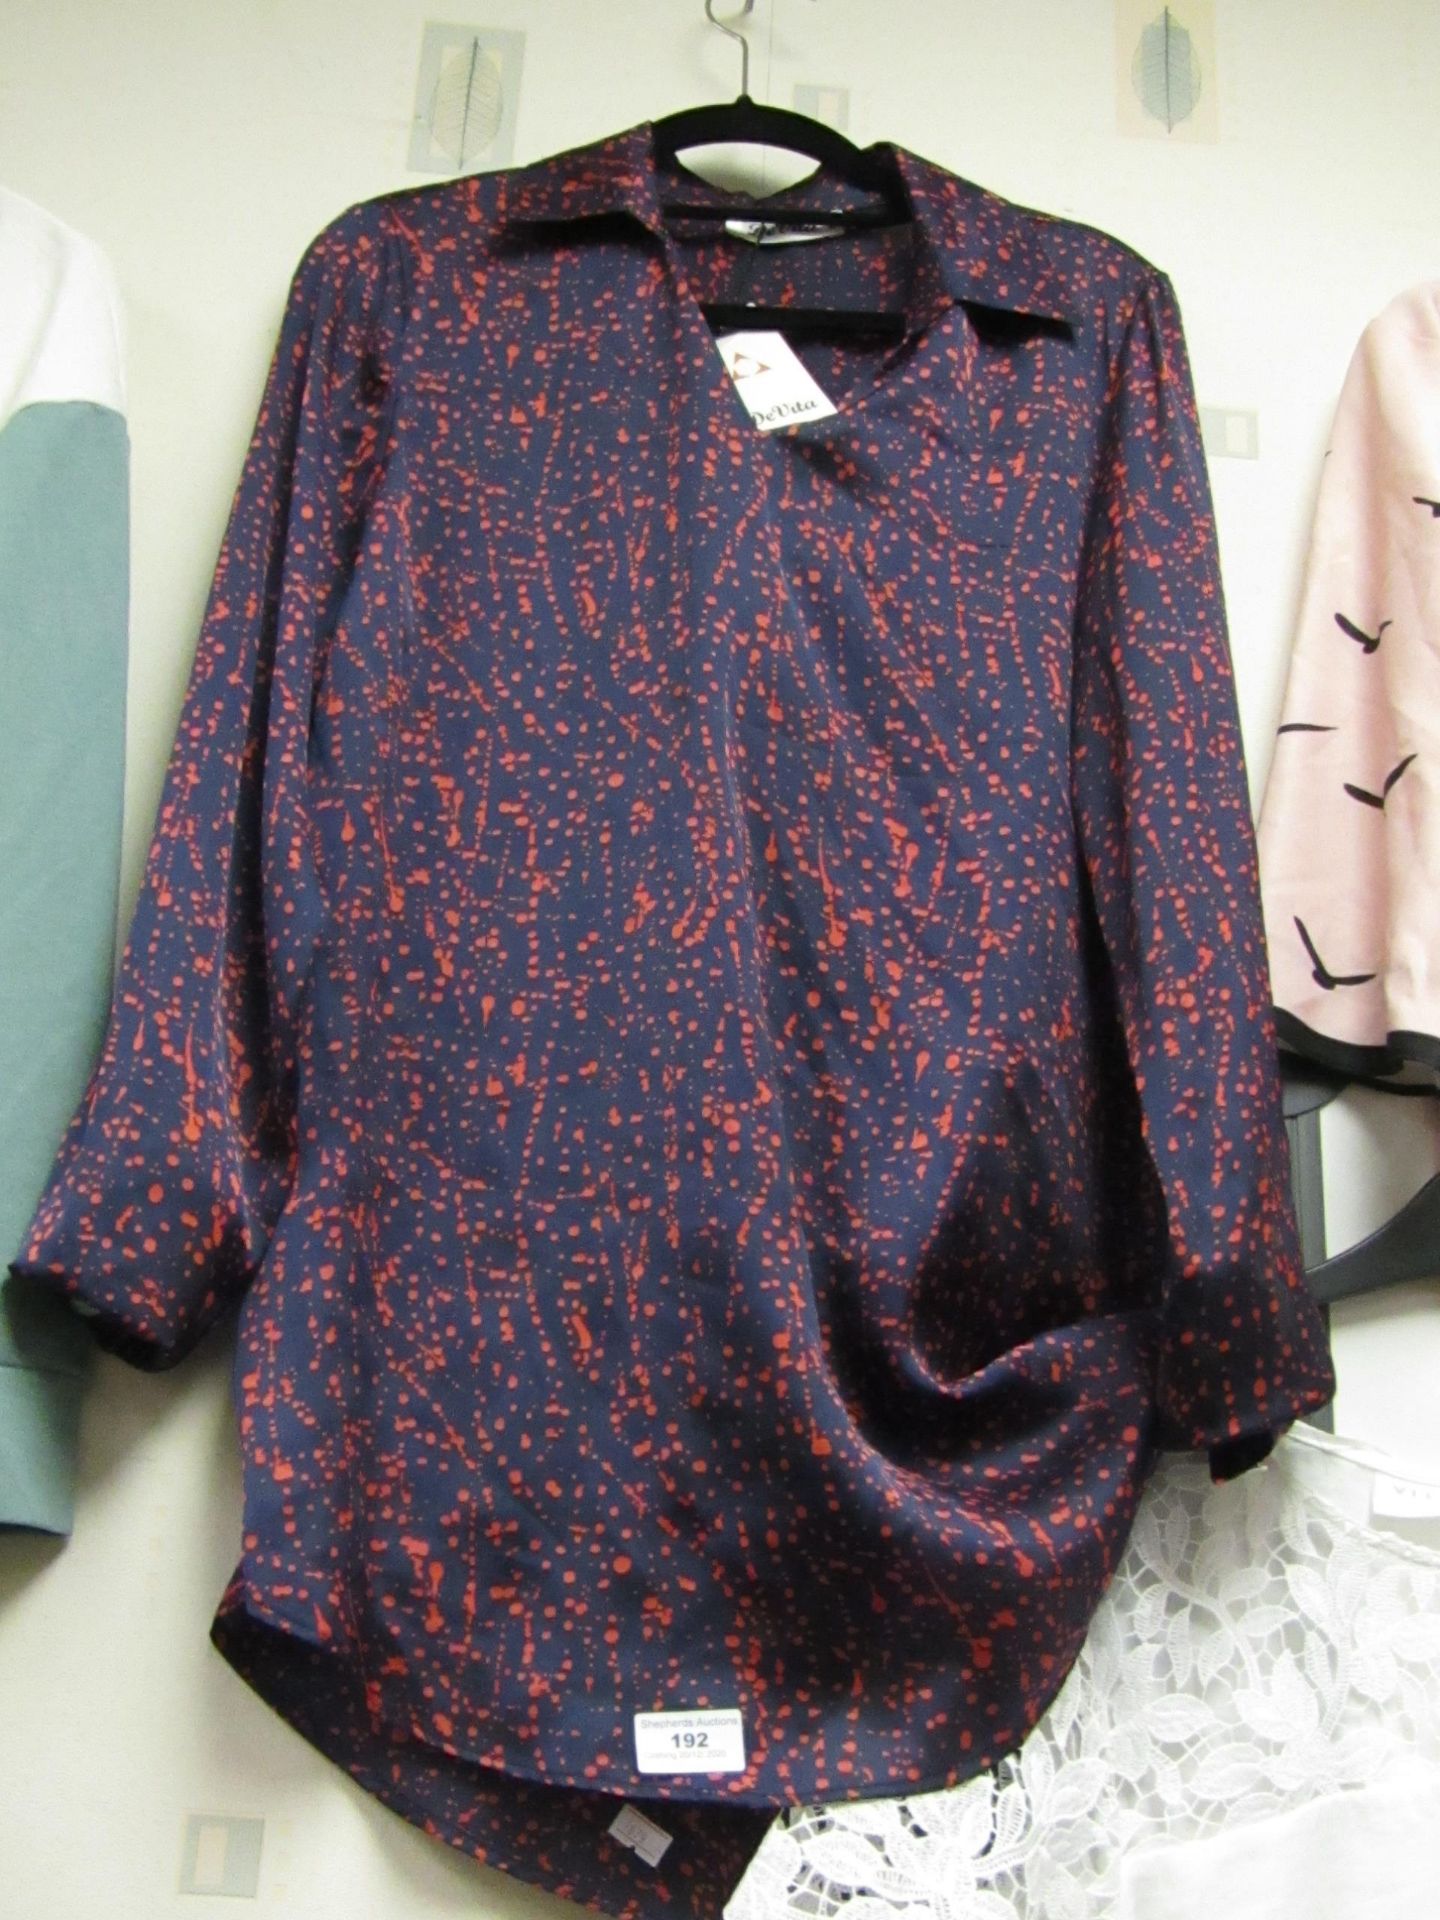 DeVita Ladies Overhead Blouse size L Has Tags Attatched